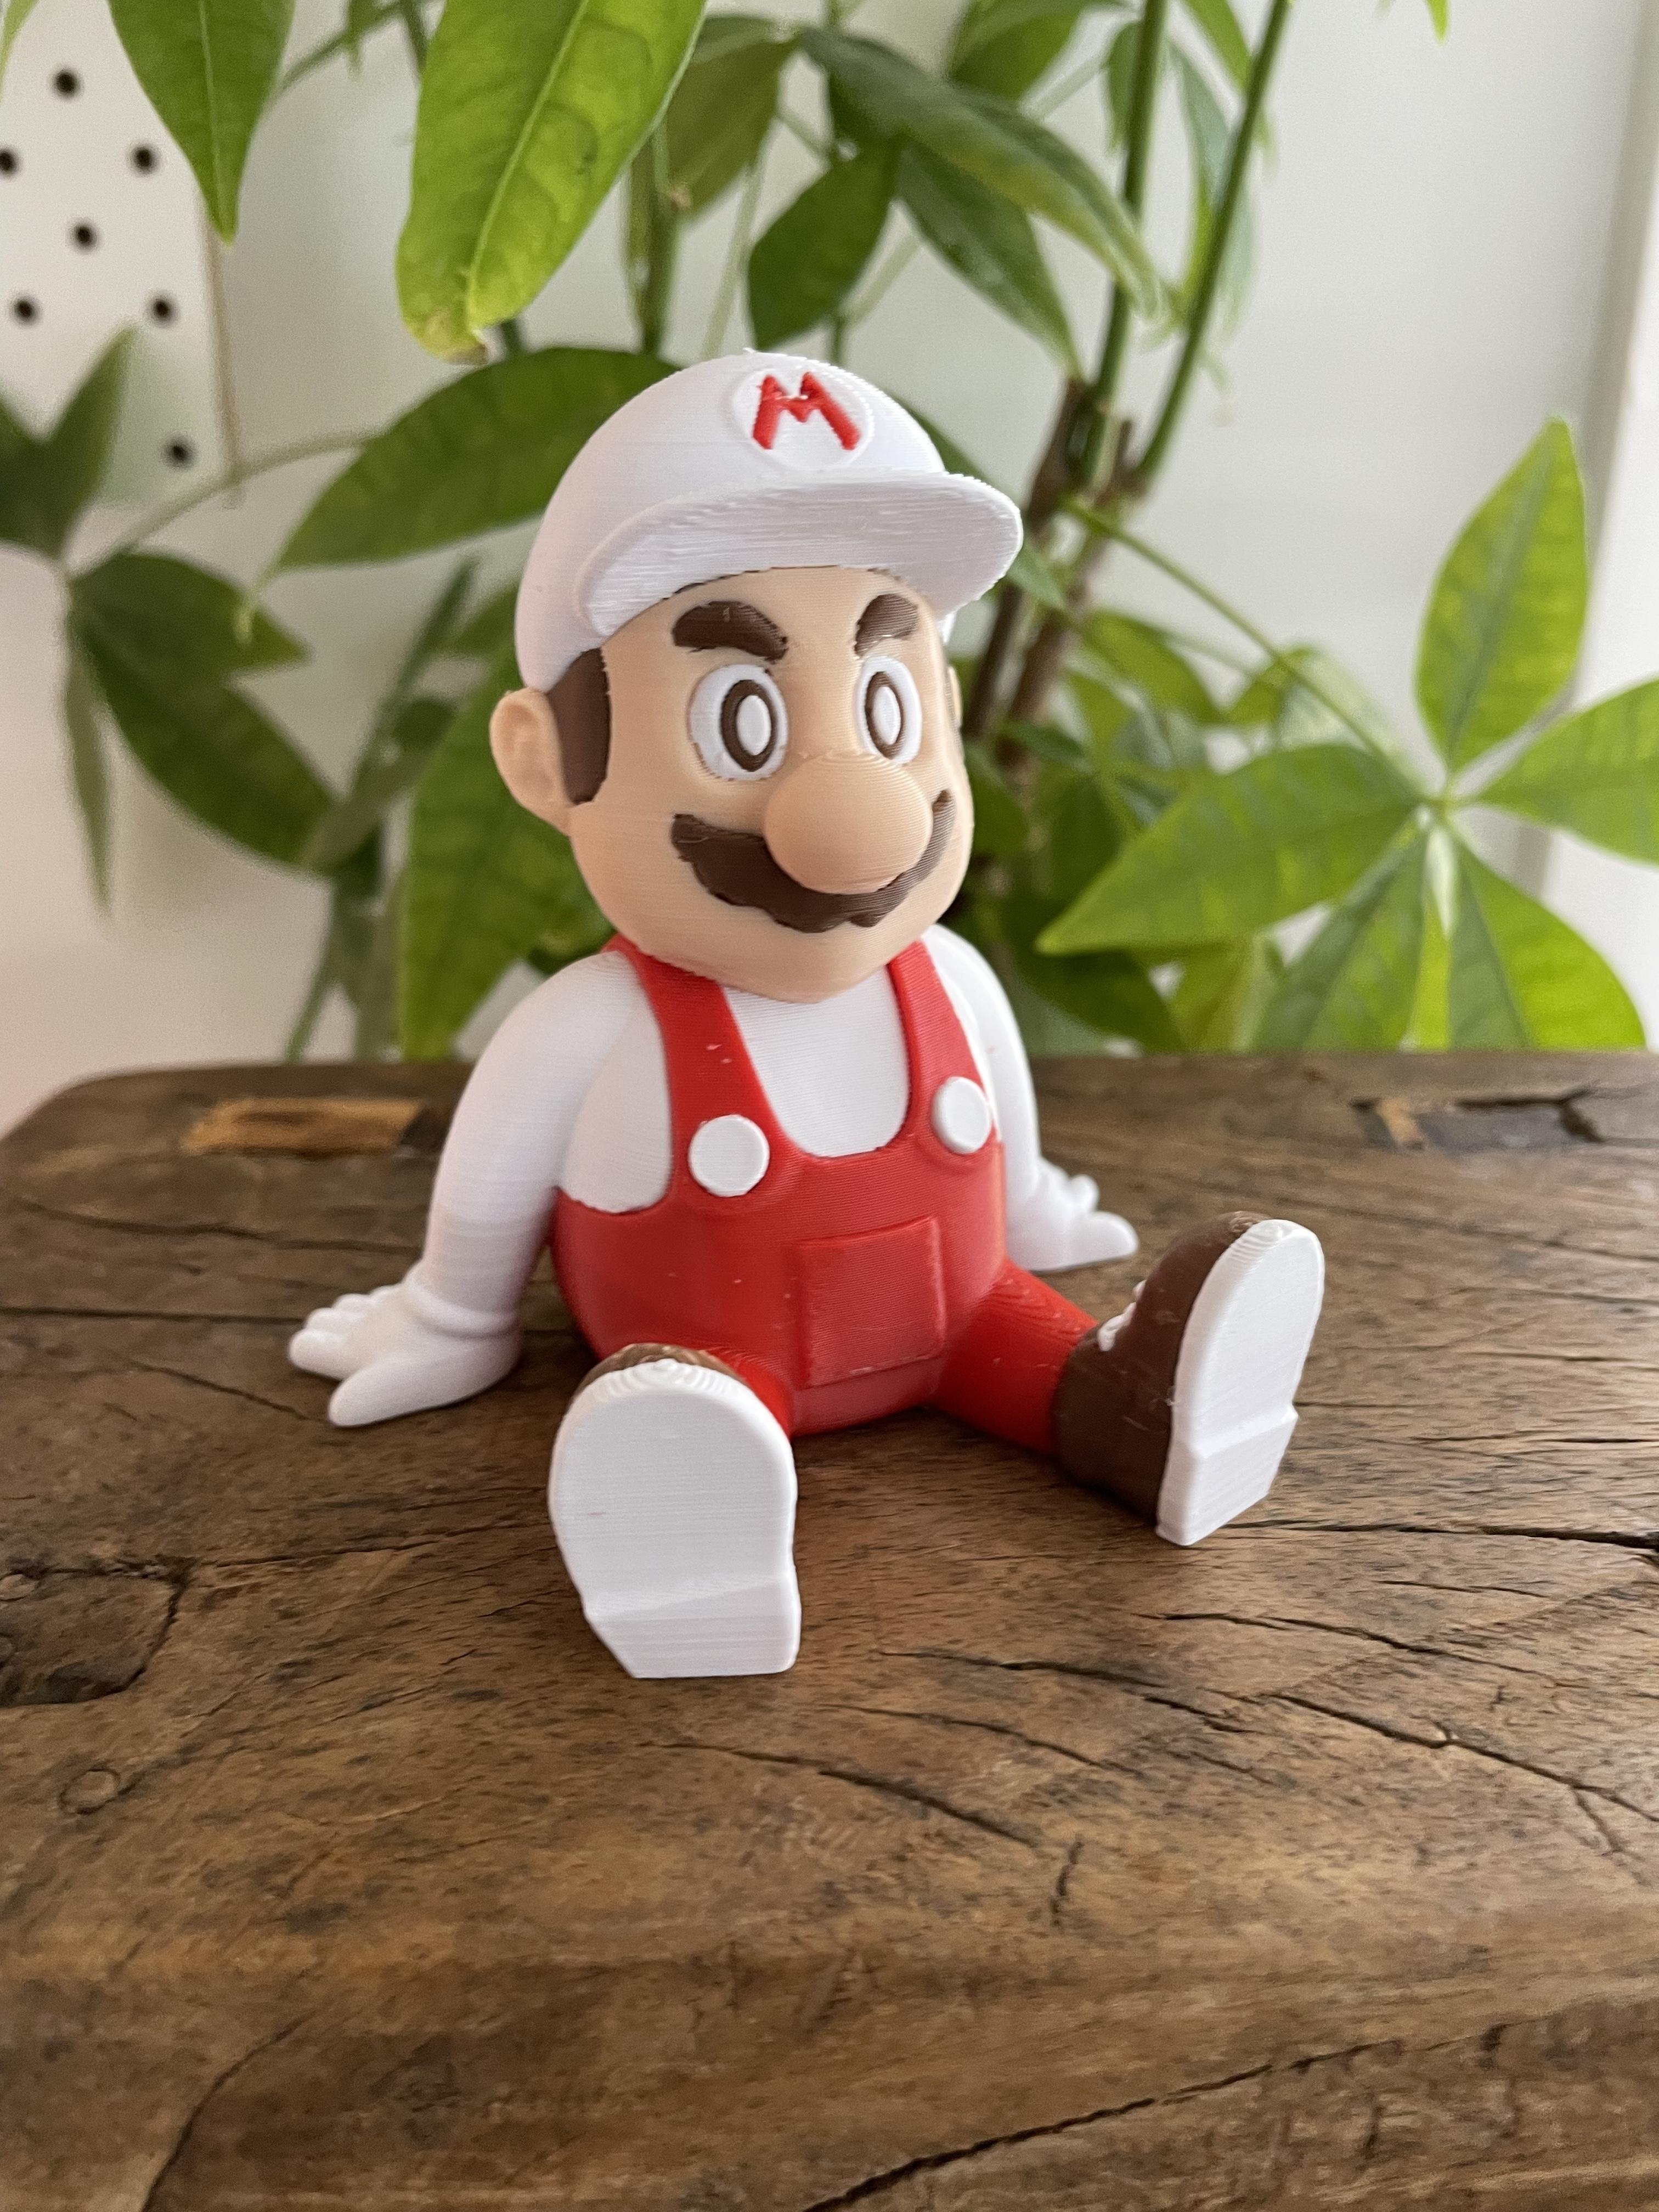 Super Chubby Mario Bros Figurine And Phone Holder / No Supports 3d model